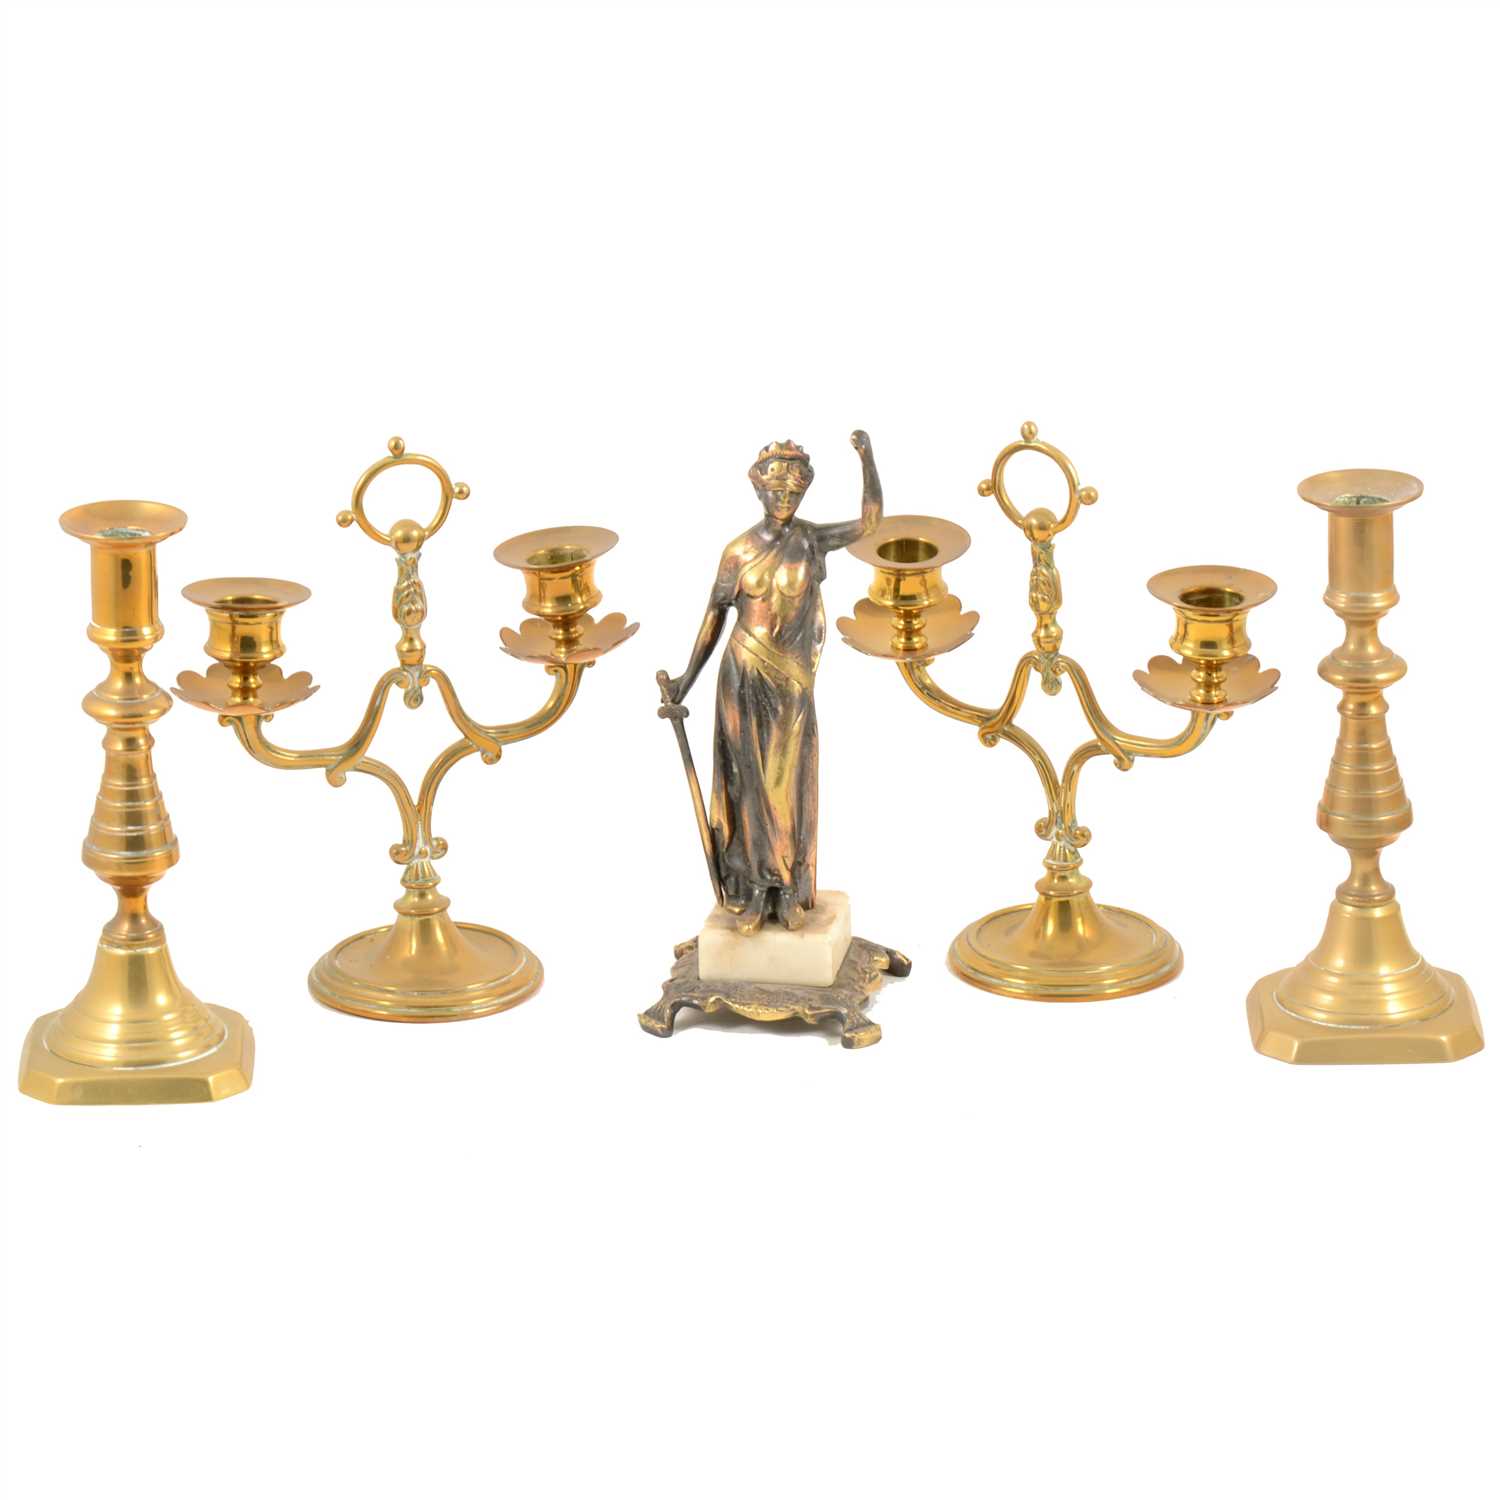 Lot 102 - Collection of brass, copper and other metalware